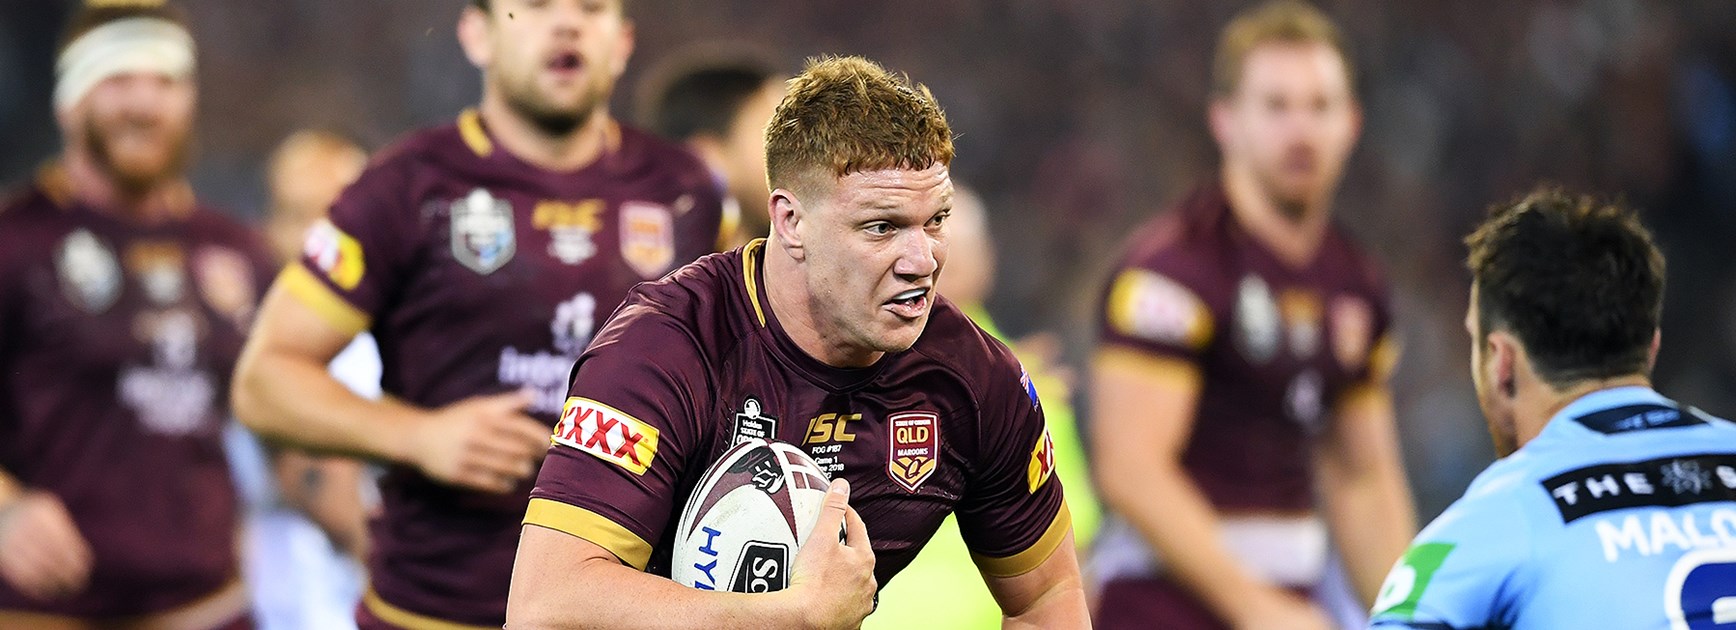 Maroons player ratings: Inglis leads from the front